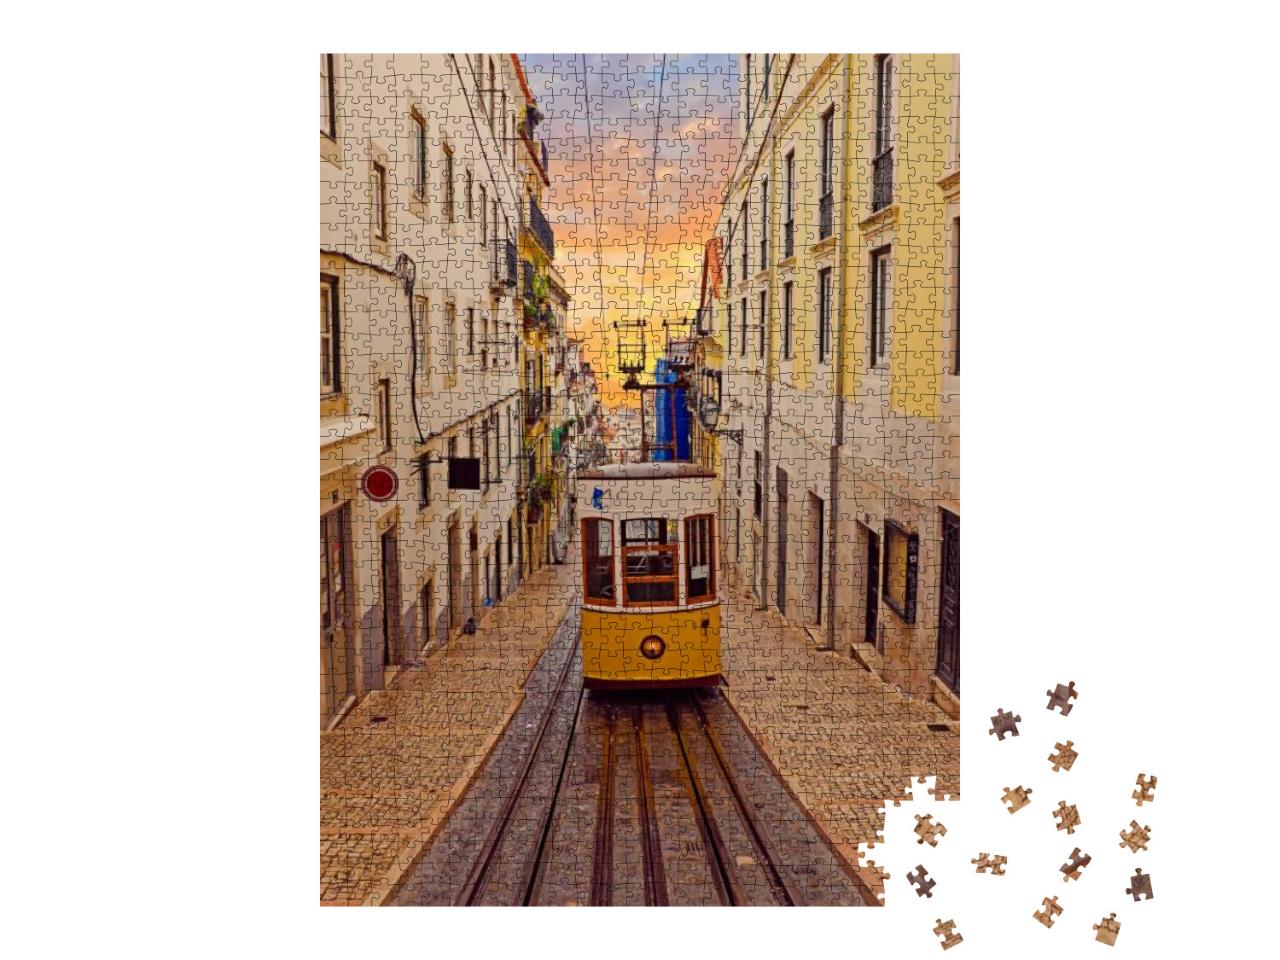 Bica Tram in Lisbon Portugal... Jigsaw Puzzle with 1000 pieces